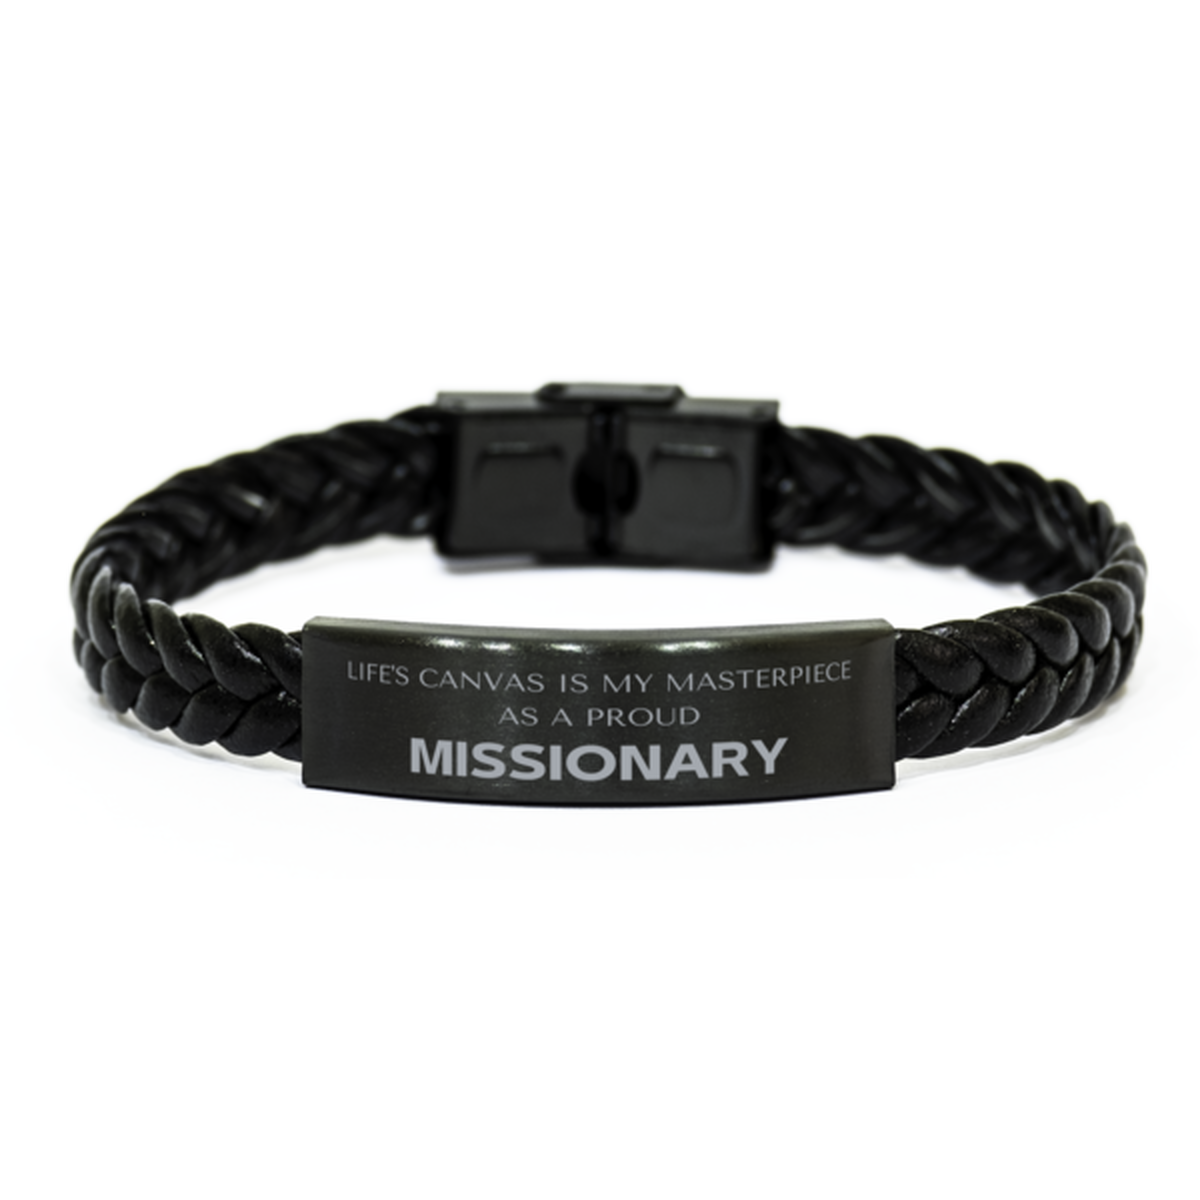 Proud Missionary Gifts, Life's canvas is my masterpiece, Epic Birthday Christmas Unique Braided Leather Bracelet For Missionary, Coworkers, Men, Women, Friends